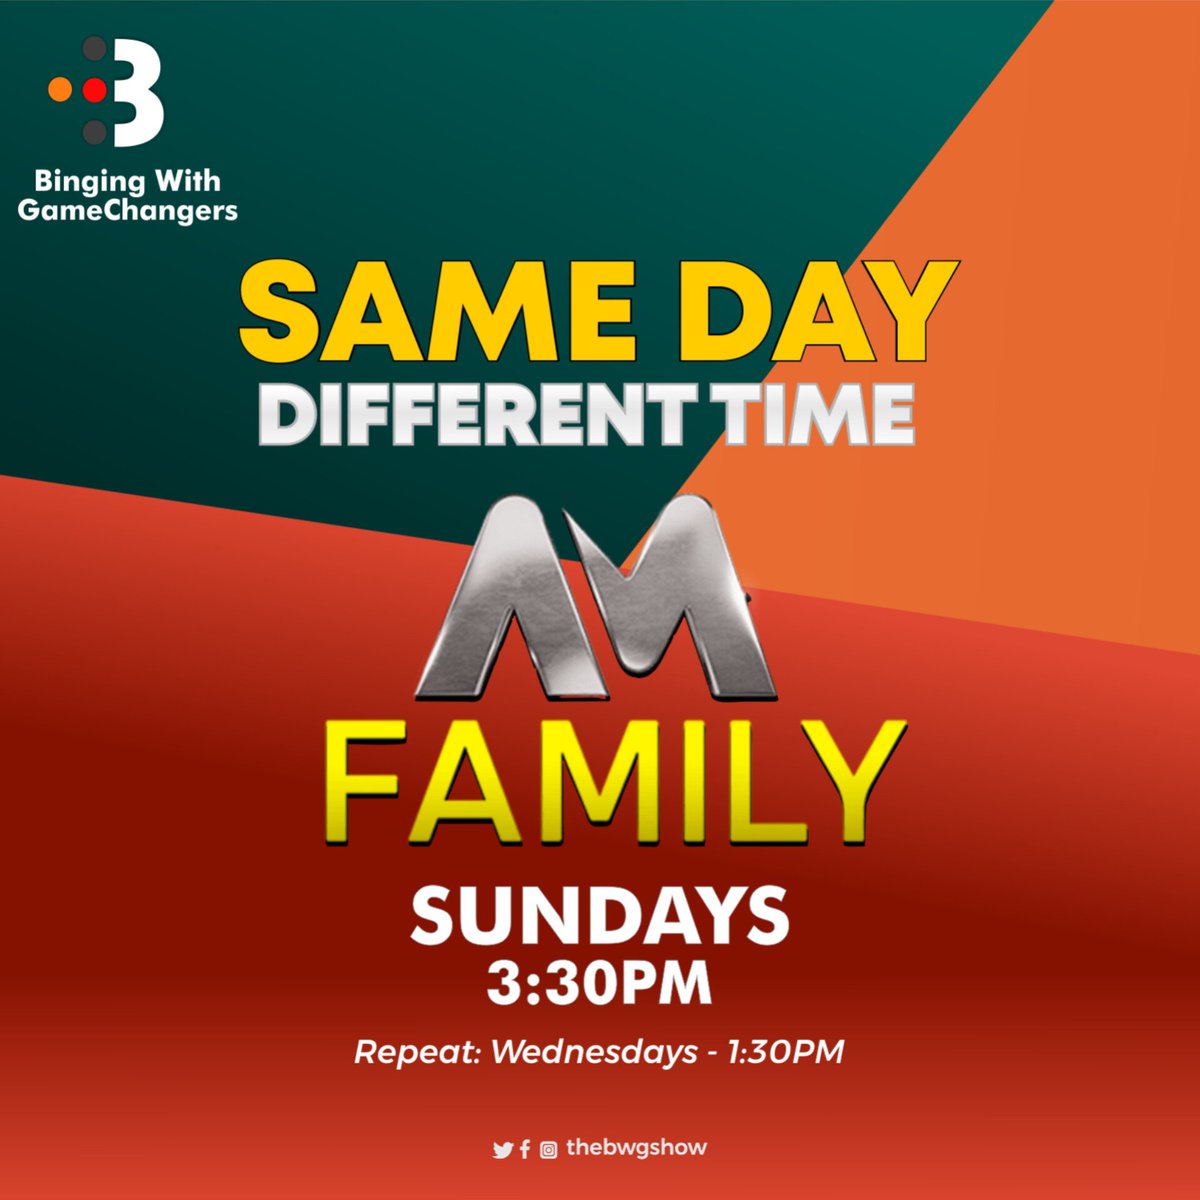 Like, Share and Tell a friend to Tell a friend!🙌🤸‍♀️🤾‍♀️🤼‍♀️

We've got a new Show Time on Africa Magic Family💃🕺

3.30pm every Sunday is when we now Happen😎✌

Repeat: 1.30pm on Wednesdays

See You Later!🖖🖐👋

#BingingwithGameChangers
#thebwgshow
#AfricaMagicFamily 
#AfricaMagic